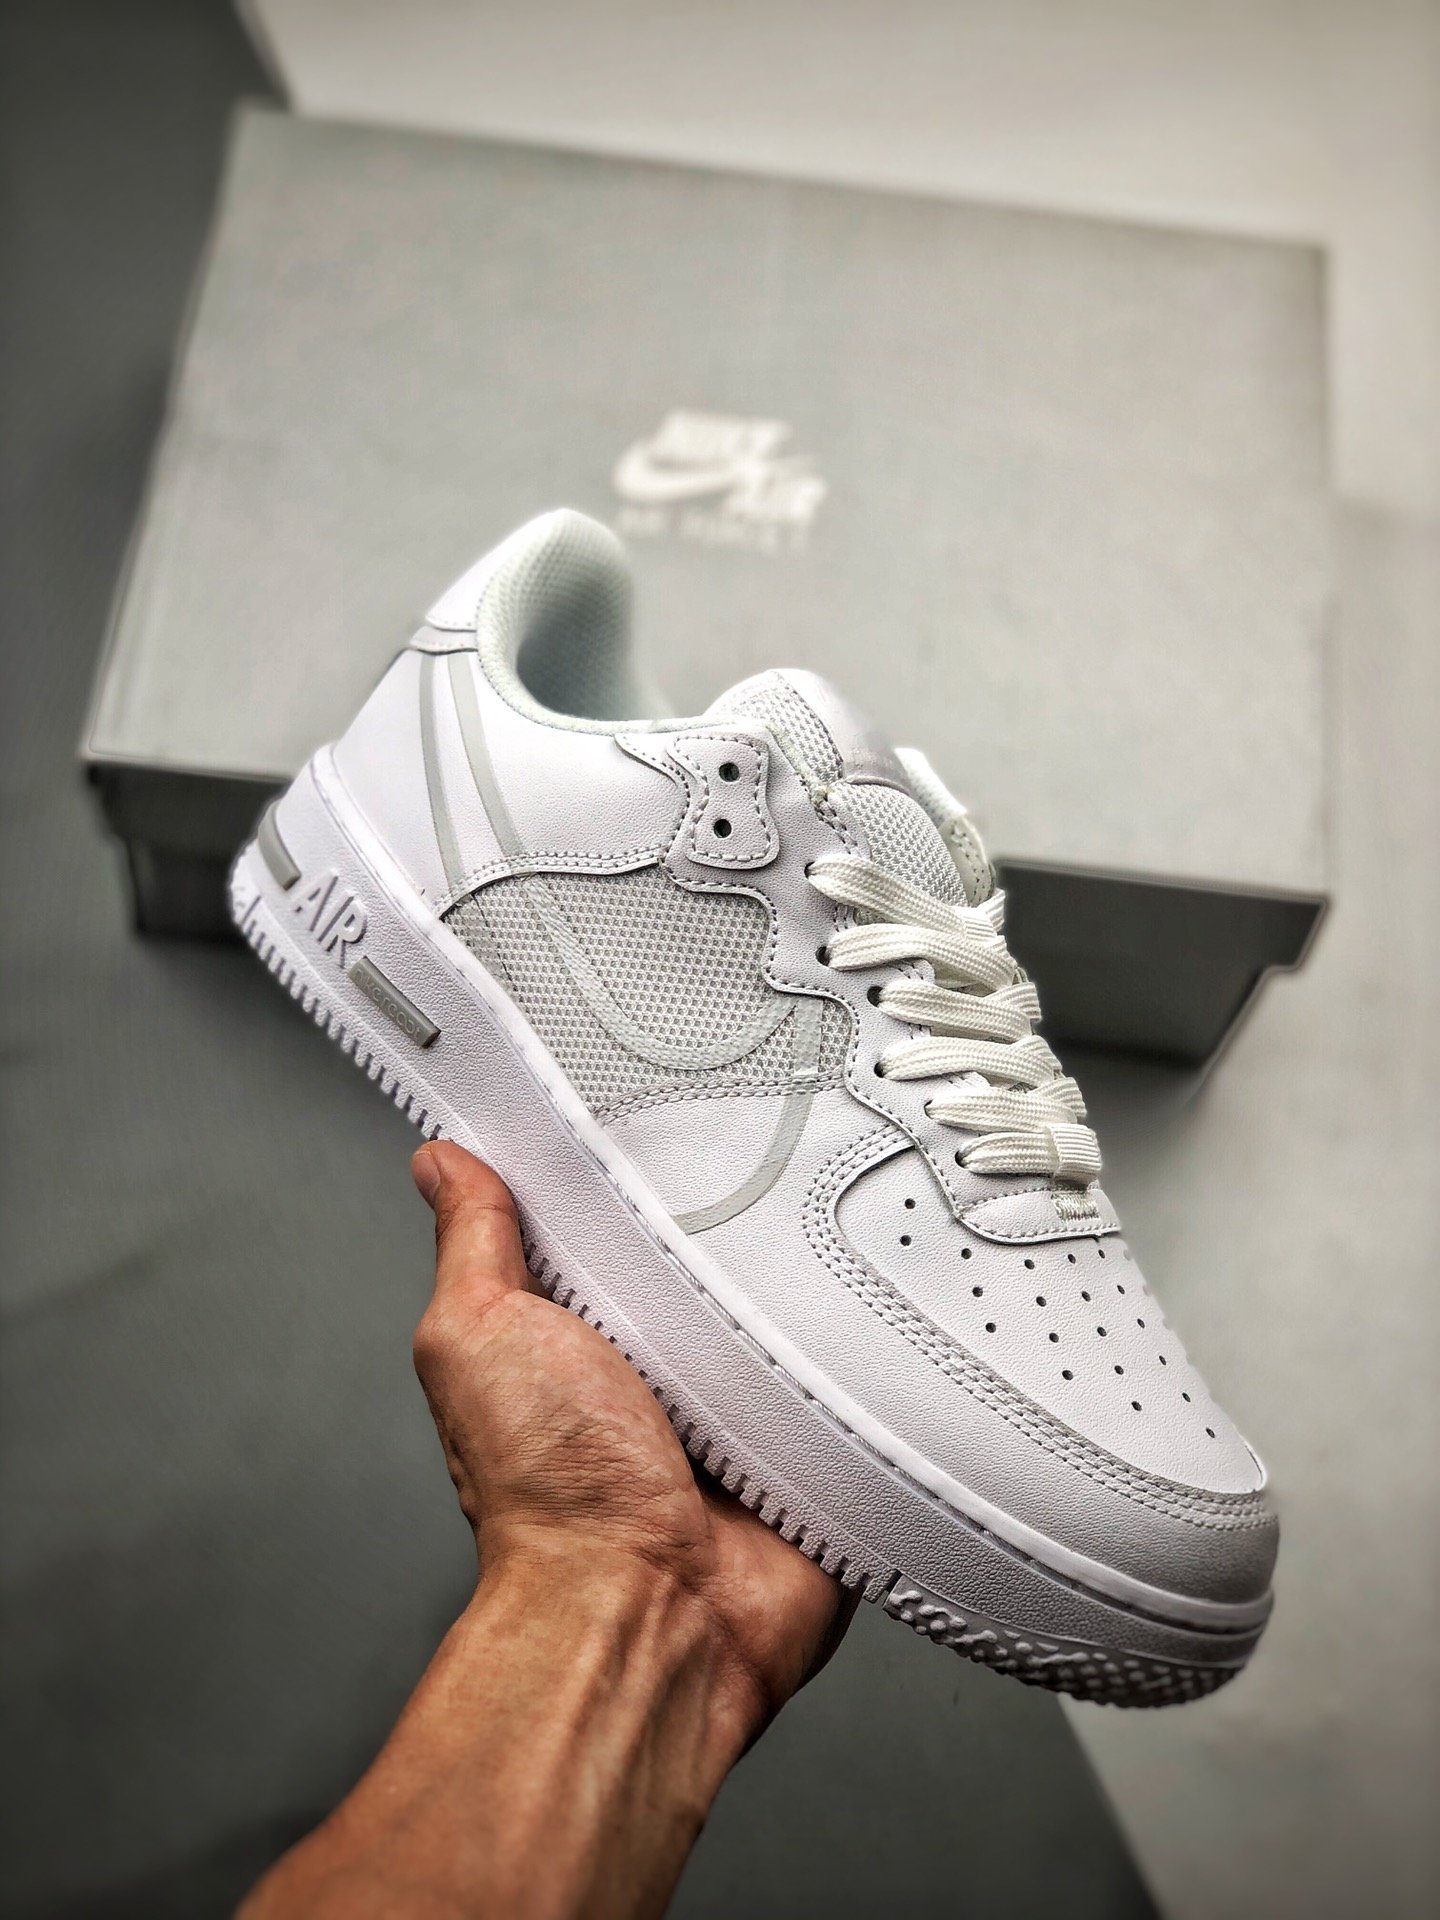 Nike Air Force 1 React D/MS/X in “White 